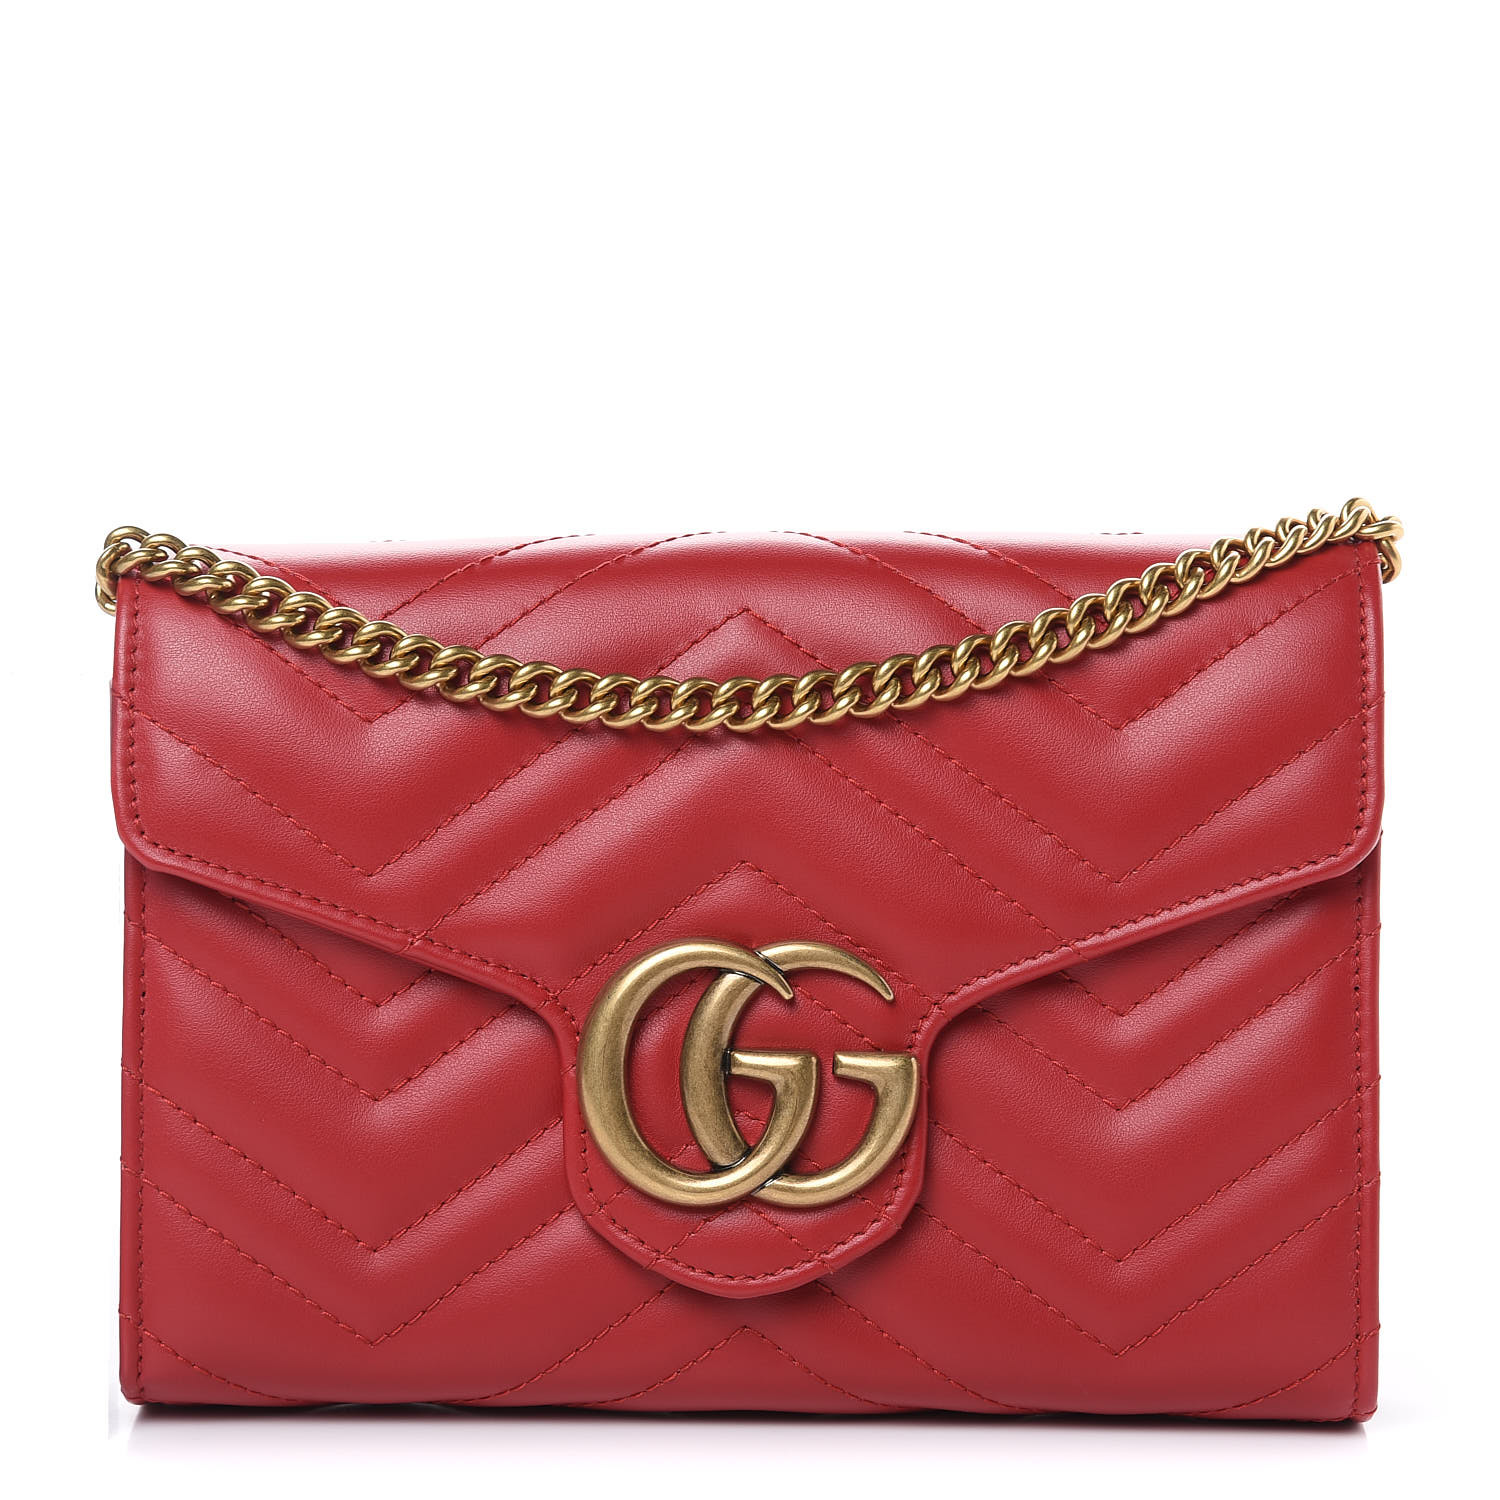 GUCCI Calfskin Matelasse GG Marmont Chain Wallet Red 435046